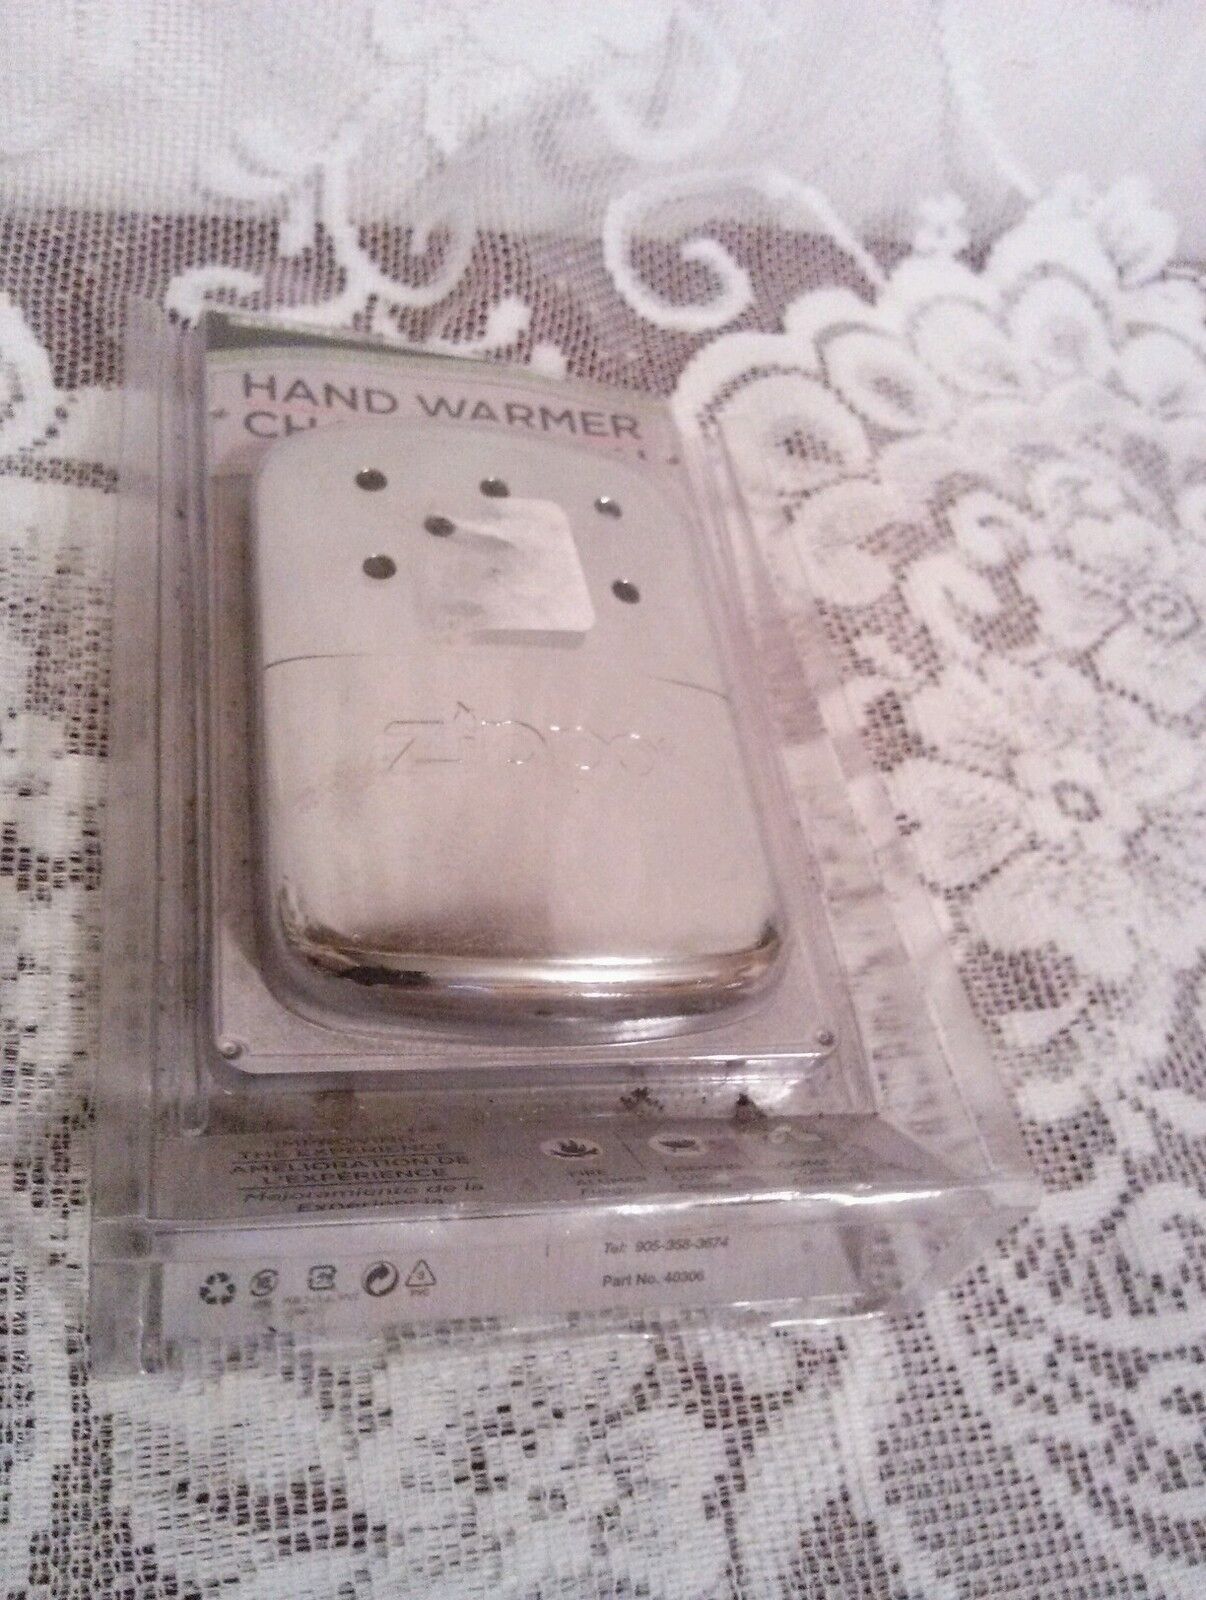 Deluxe Zippo Handwarmer Metal Chrome Color With Filler Cup & Warming Bag New !